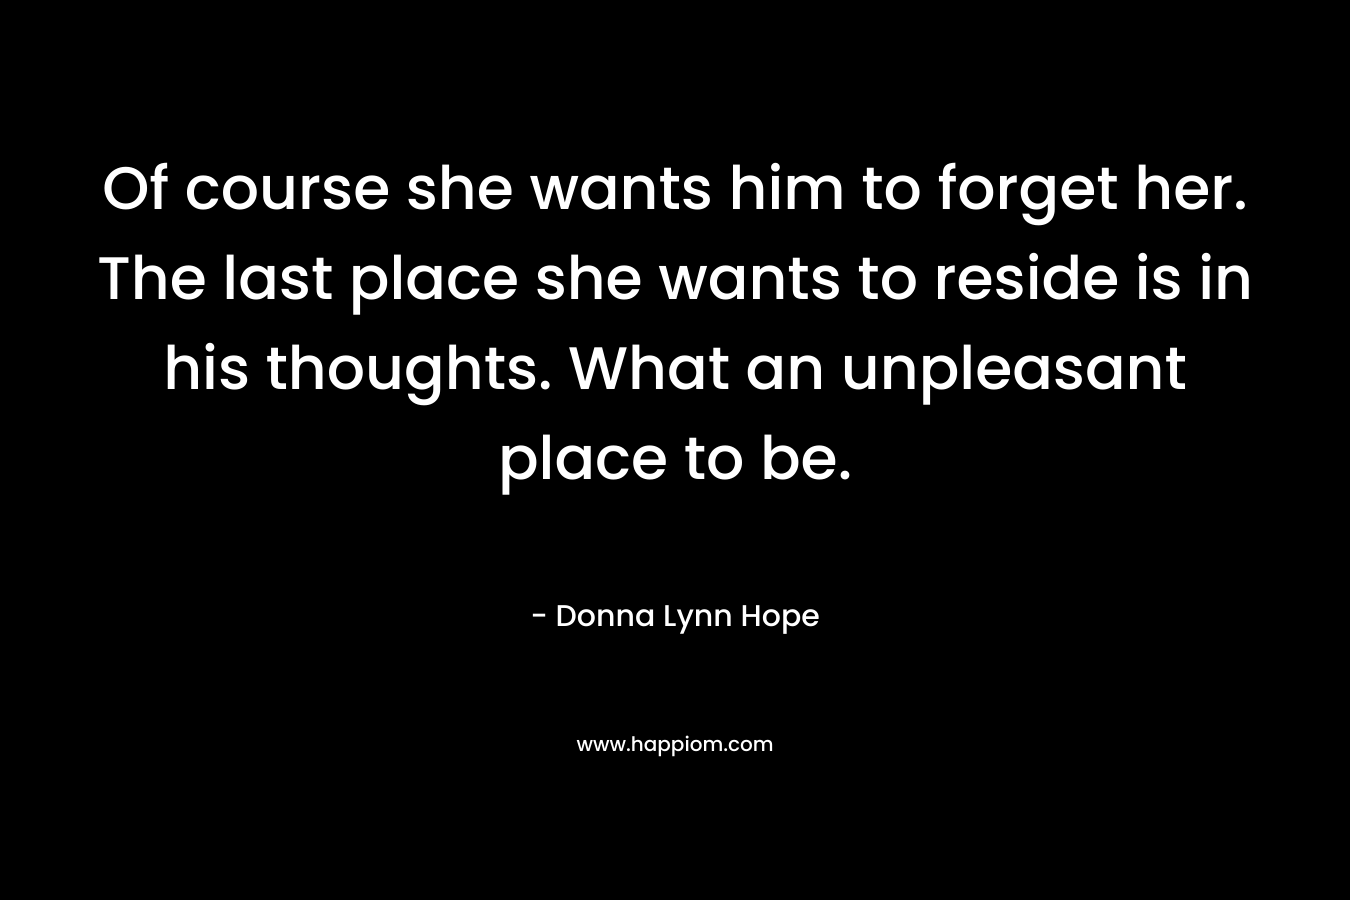 Of course she wants him to forget her. The last place she wants to reside is in his thoughts. What an unpleasant place to be. – Donna Lynn Hope